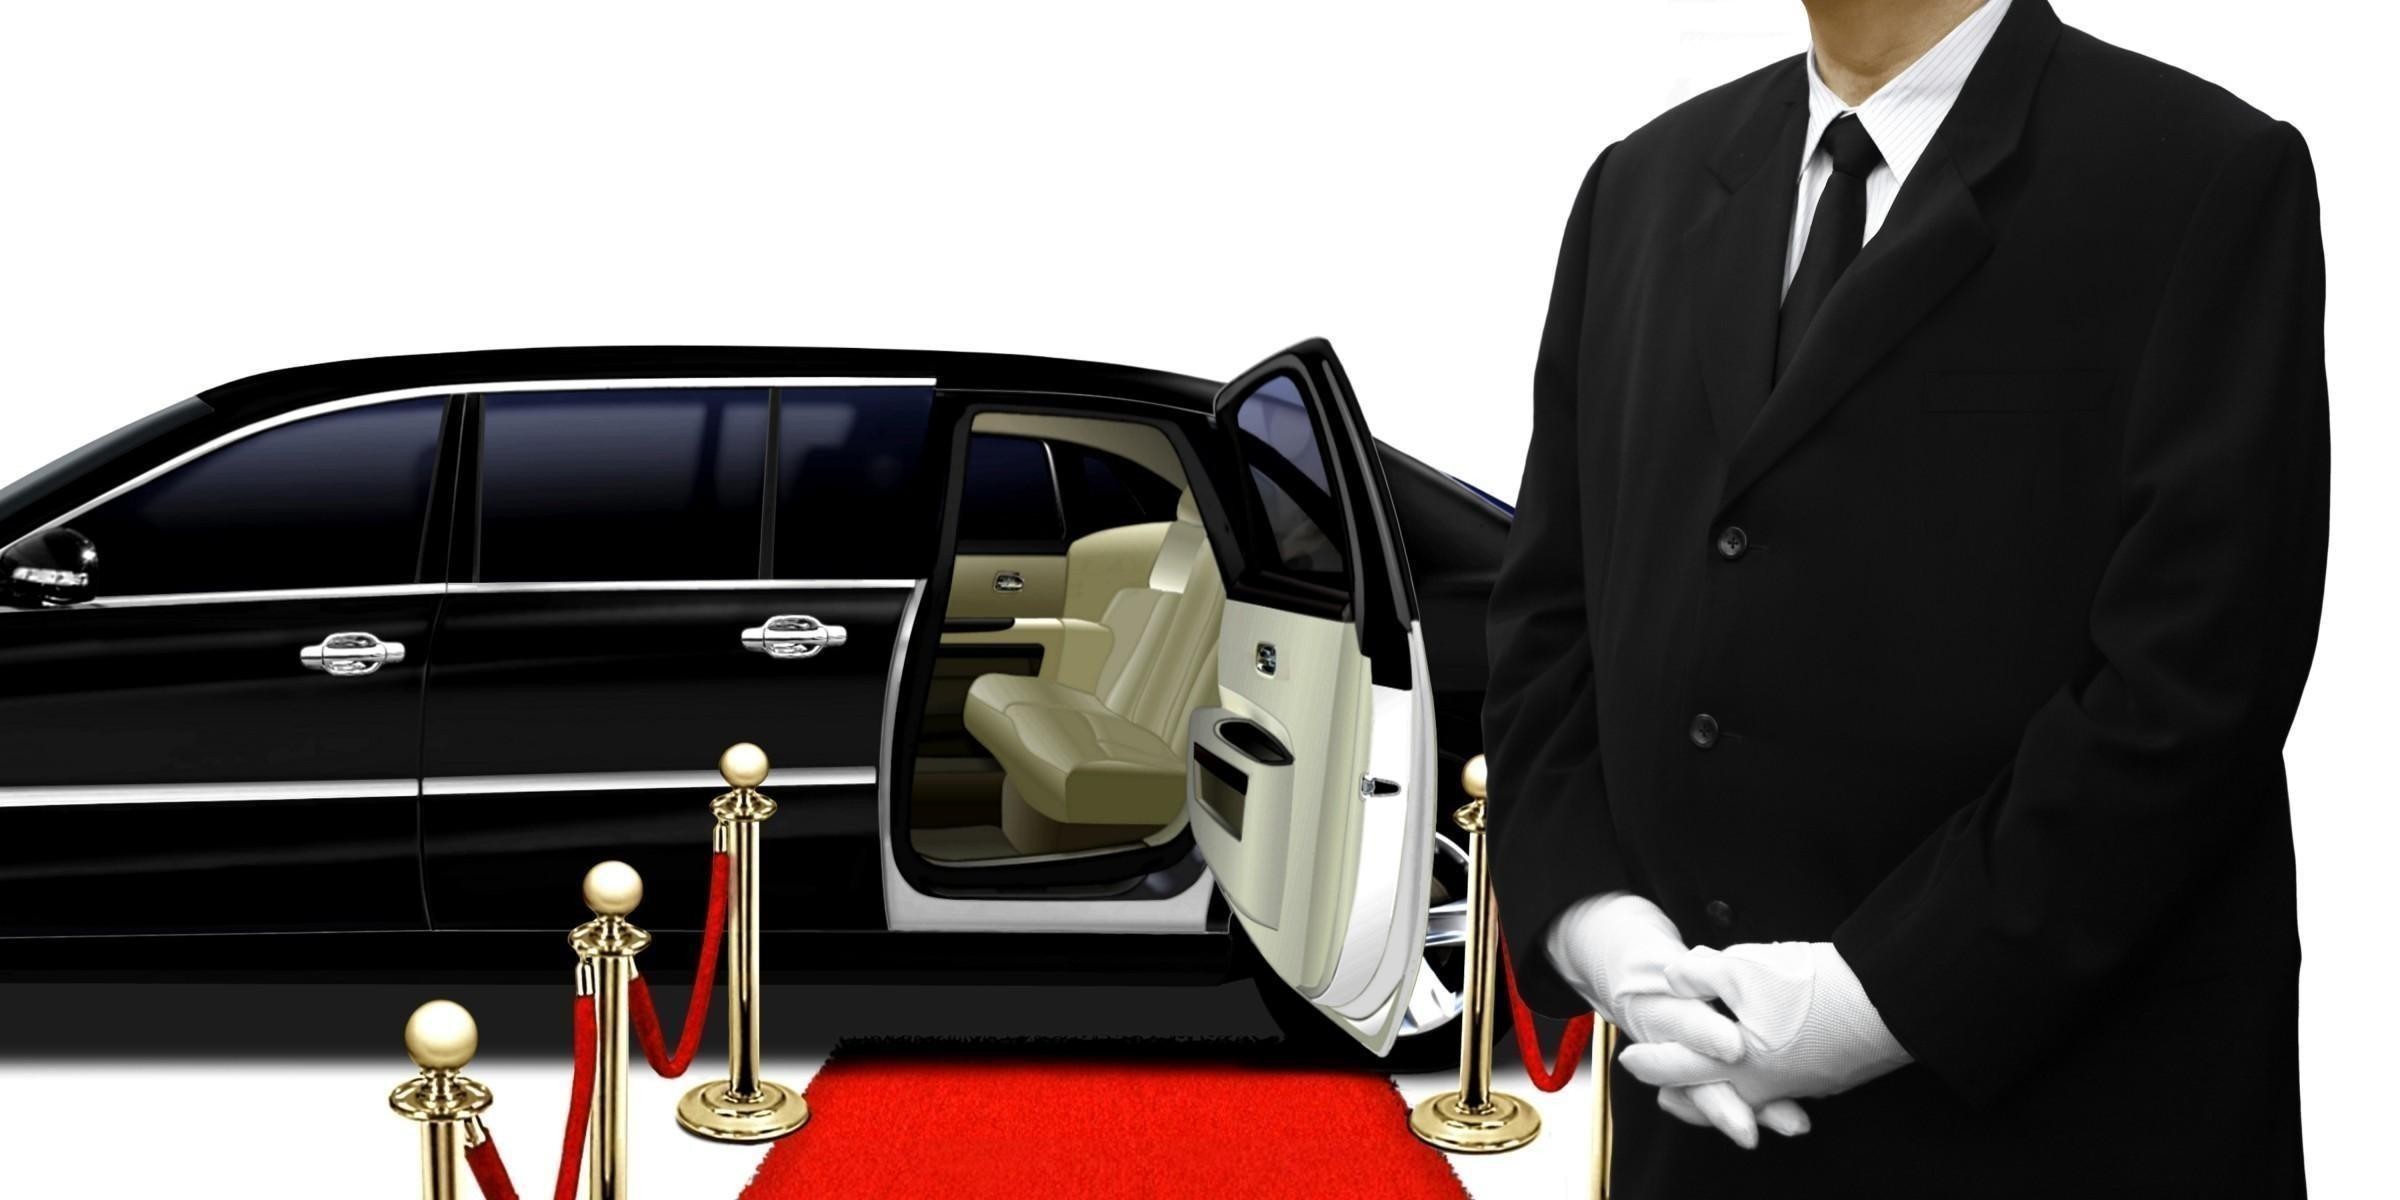 Luxury  limousine hire business in Melbourne...Business For Sale